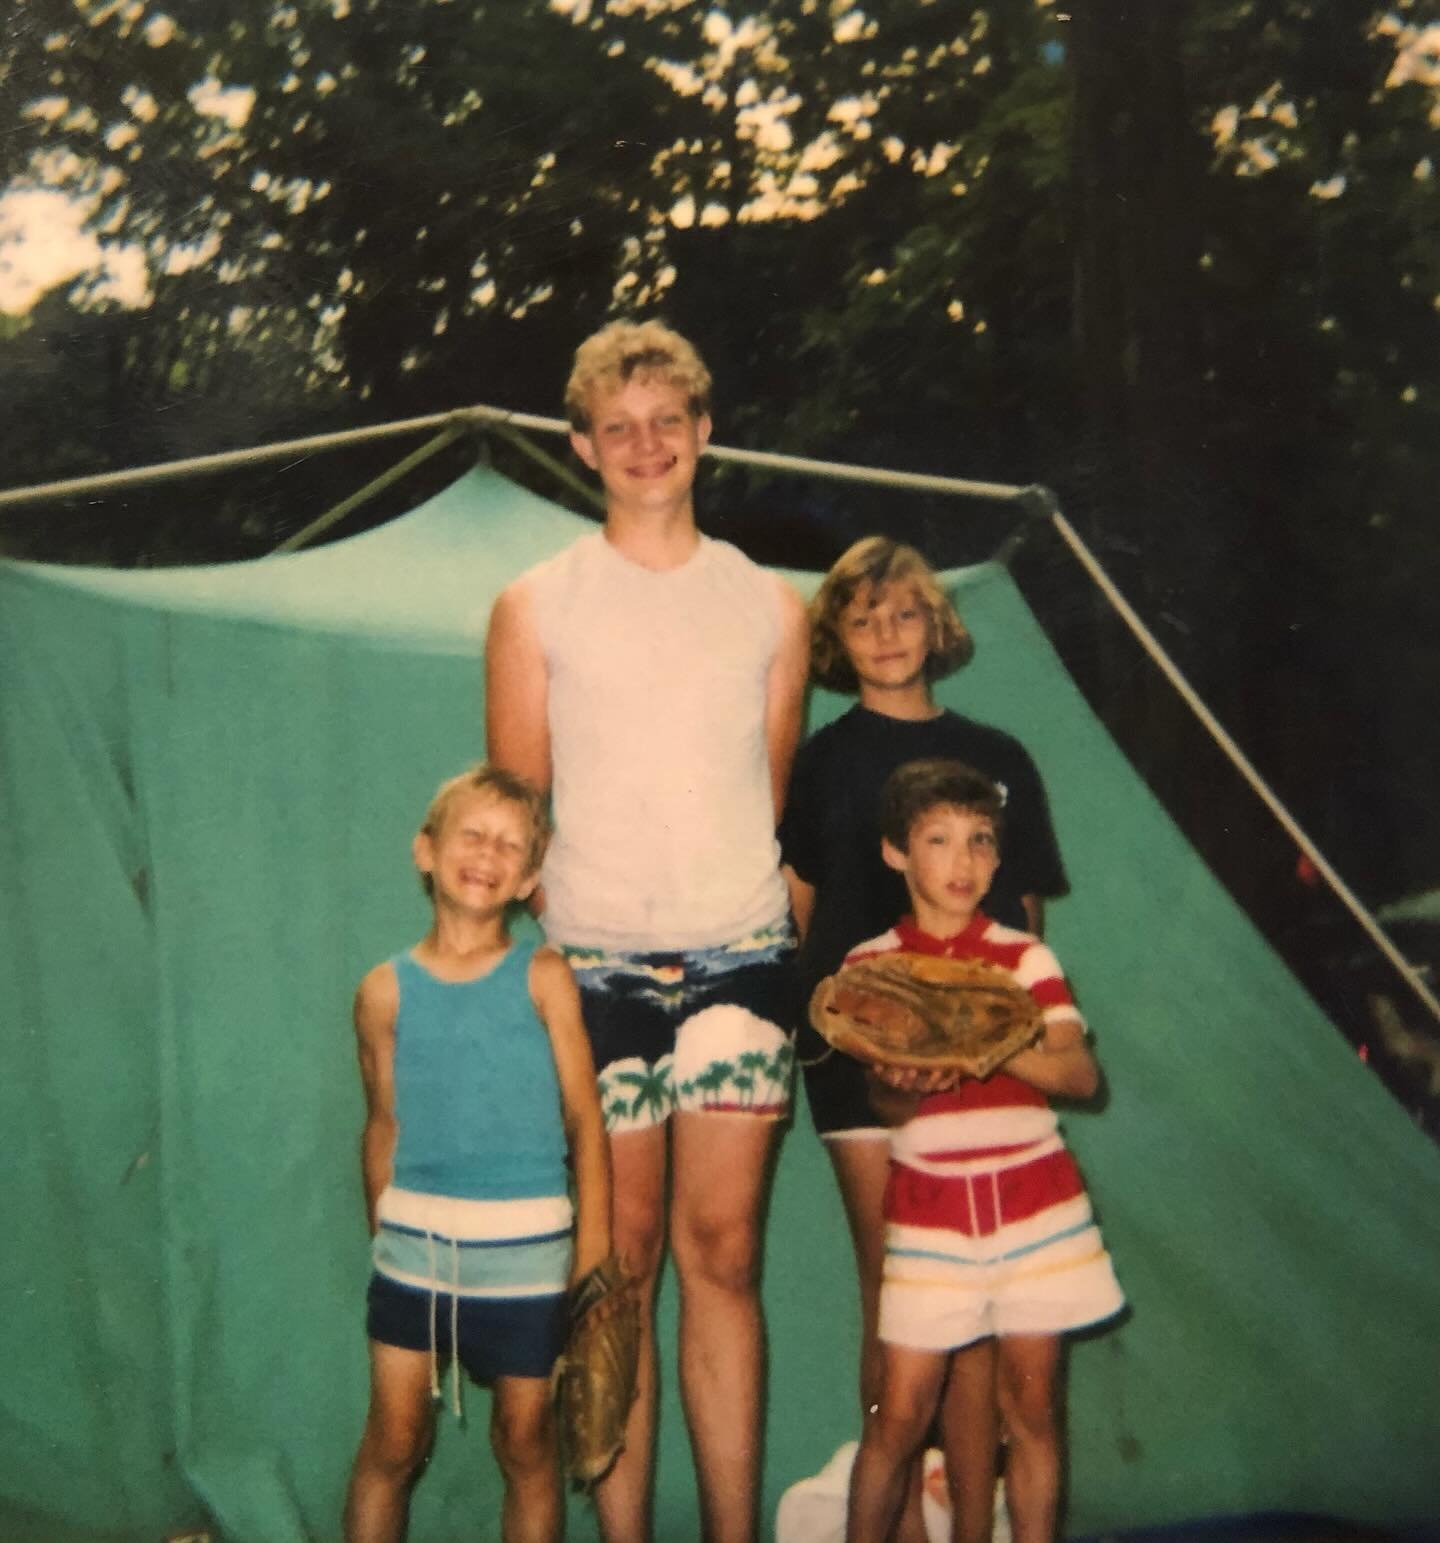 Happy National Siblings Day! 

Dearest Alan, Justin, Brian, Joey and Zach - Thank you for treating me just like one of you by

Putting Frogs in my pockets 🐸
Tipping me in the canoe 🛶
Hooking me while fishing 🎣
Chasing me with snakes 🐍
Throwing Sp